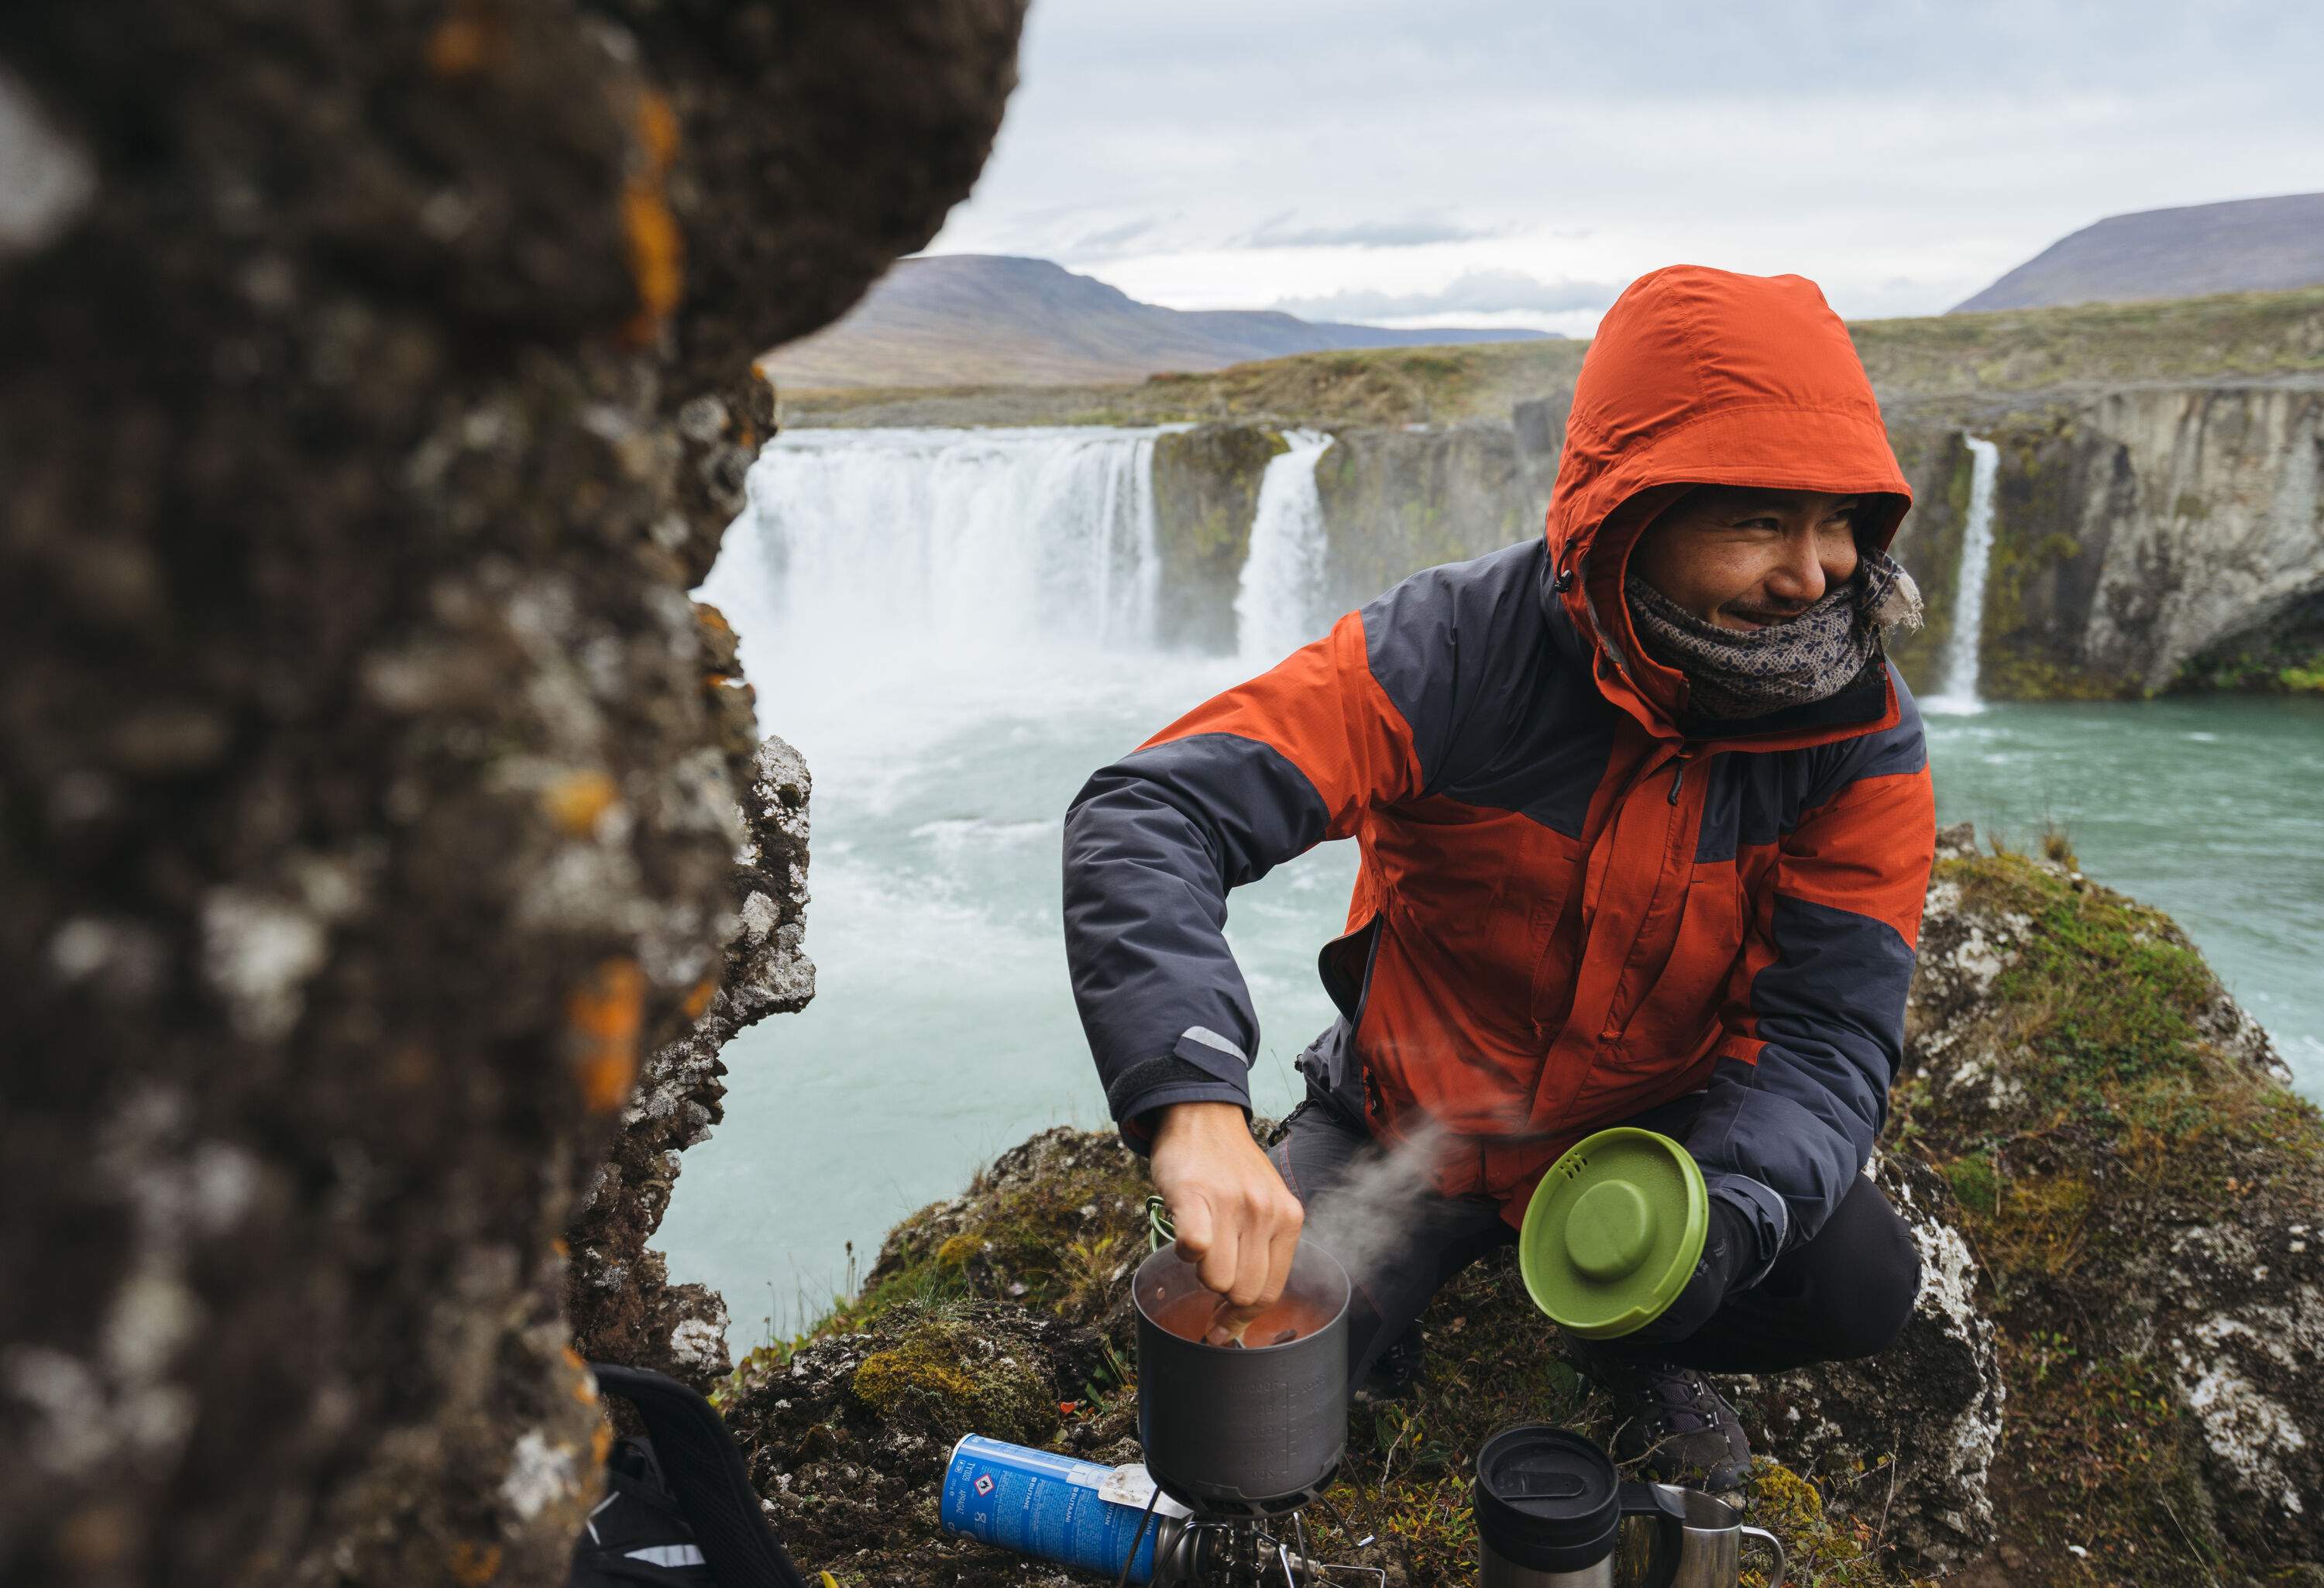 A male camper cooking on a camping stove with a beautiful waterfall behind him.